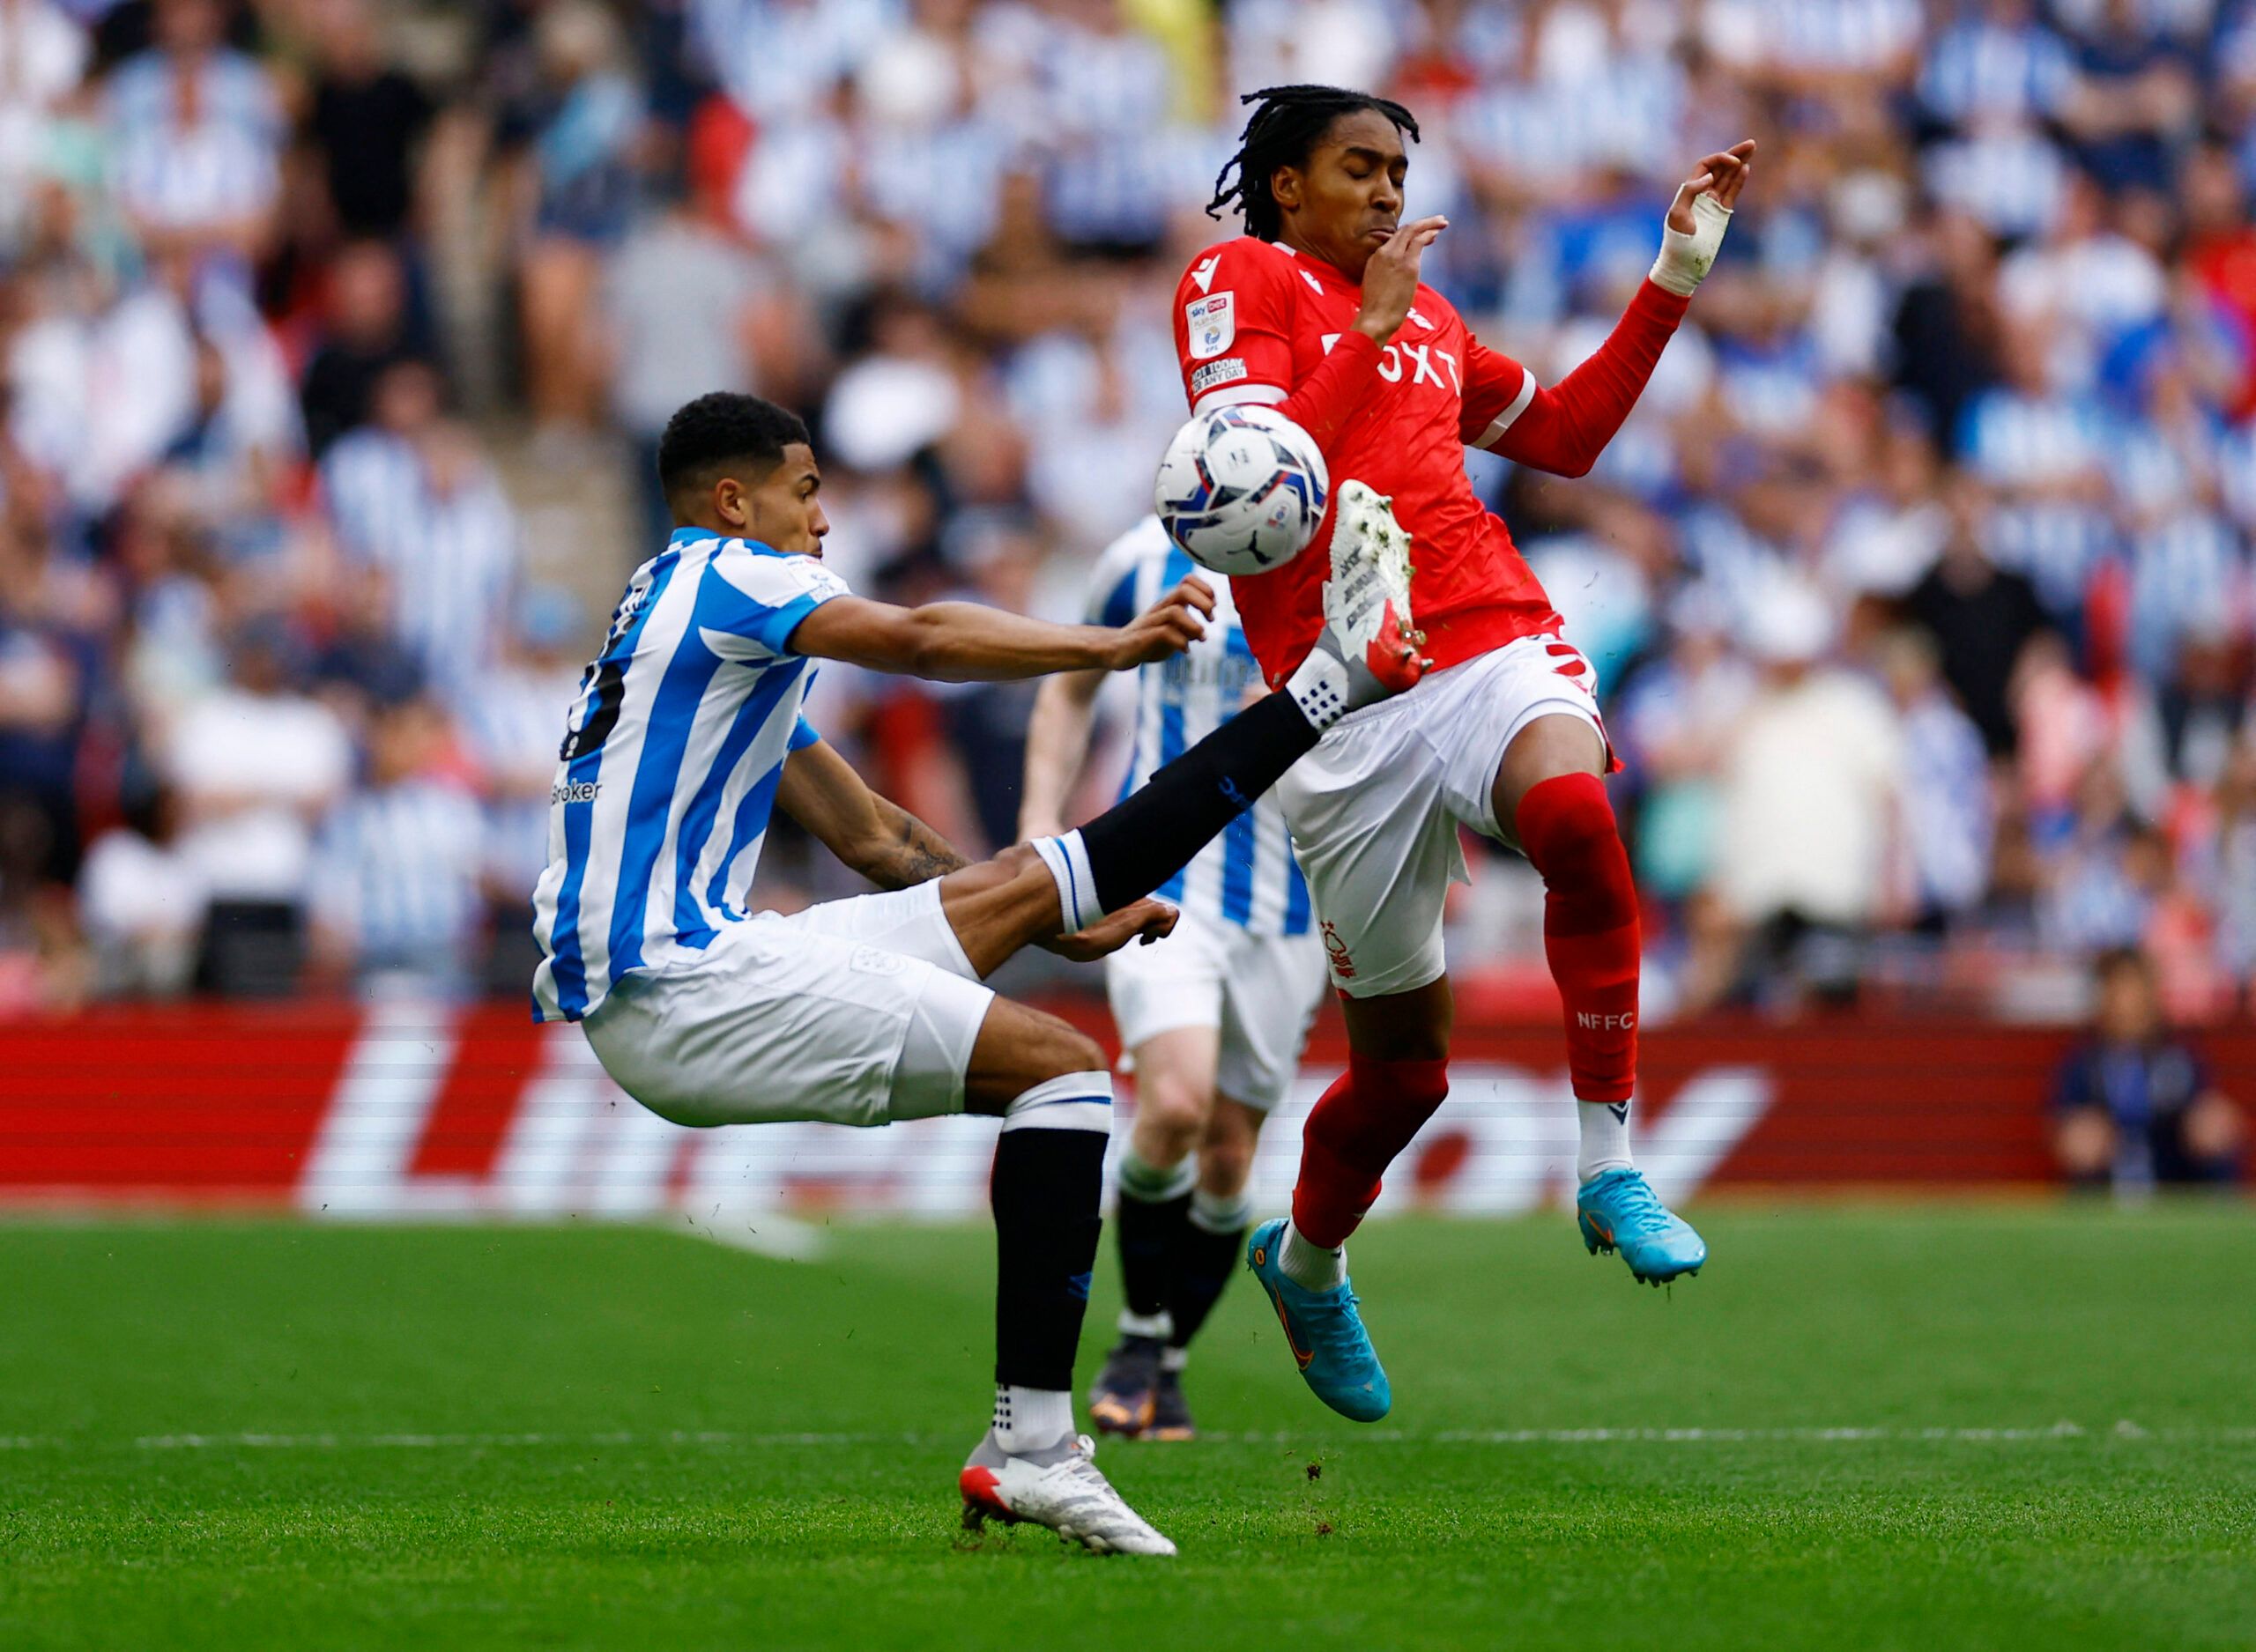 Soccer Football - Championship Play-Off Final - Huddersfield Town v Nottingham Forest - Wembley Stadium, London, Britain - May 29, 2022 Huddersfield Town's Levi Samuels Colwill in action with Nottingham Forest's Djed Spence Action Images via Reuters/Andrew Boyers